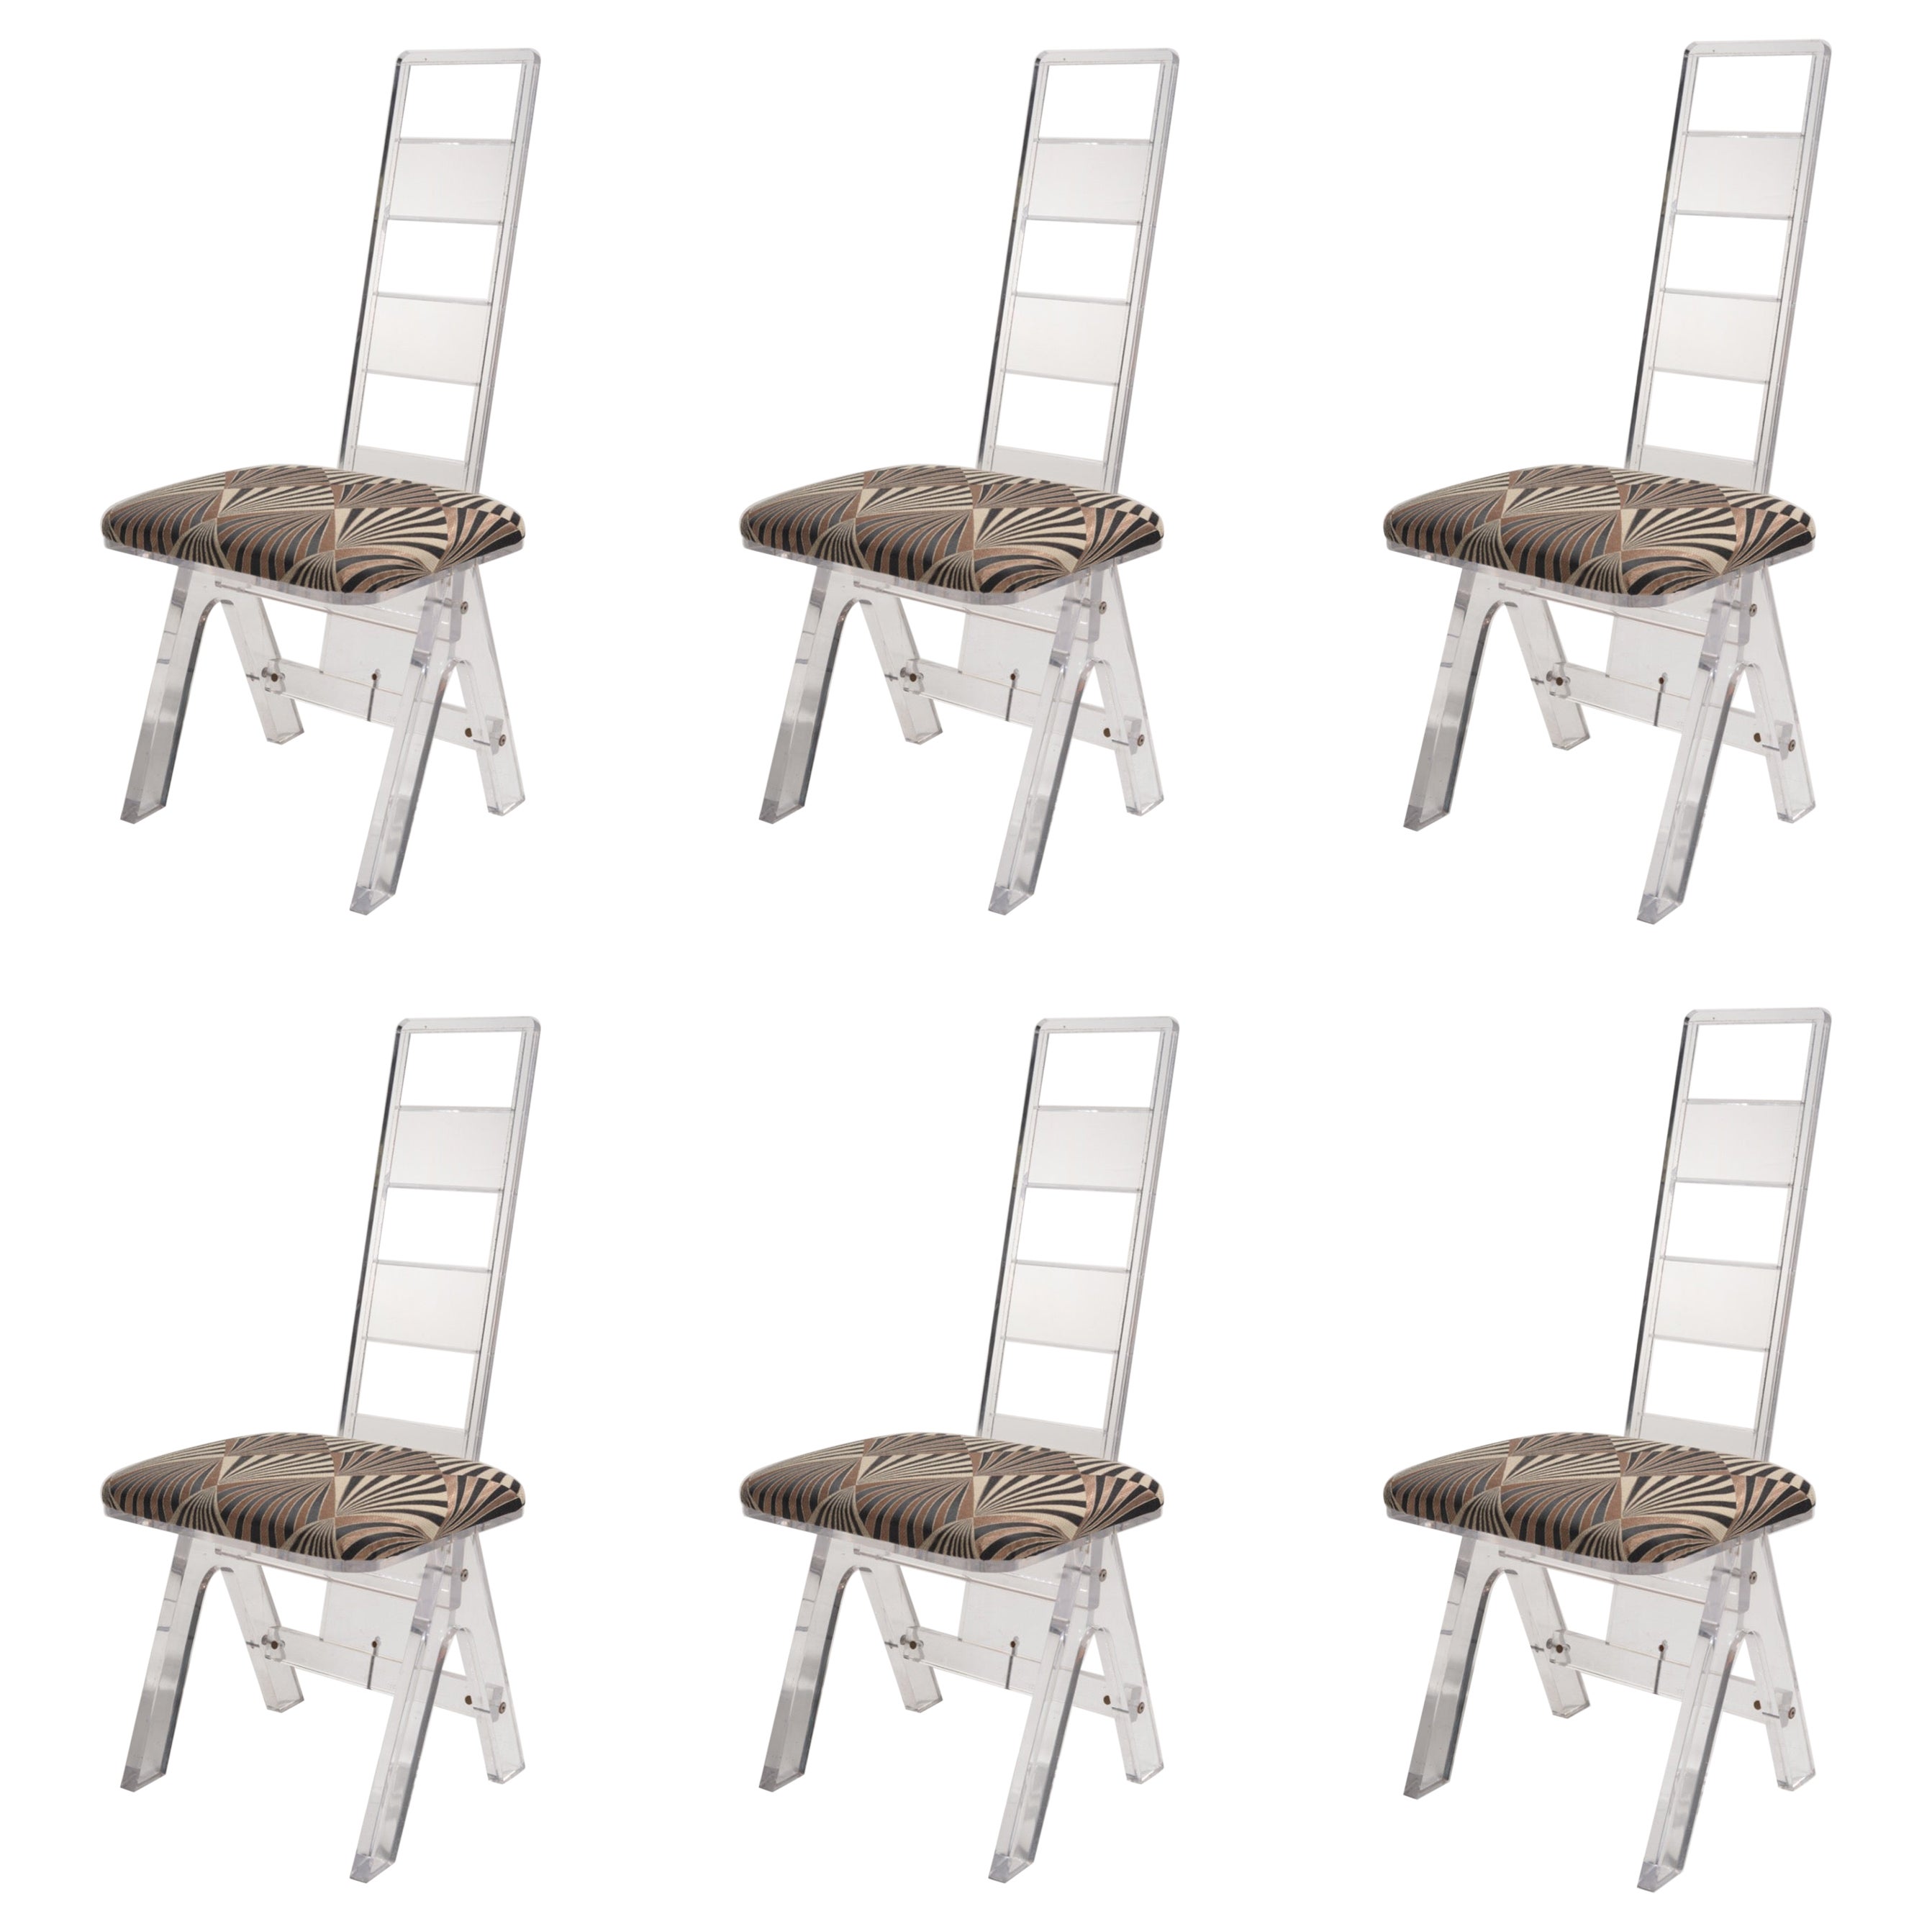 Set of 6 Lucite Chairs by Herb Rittz, c1970 For Sale